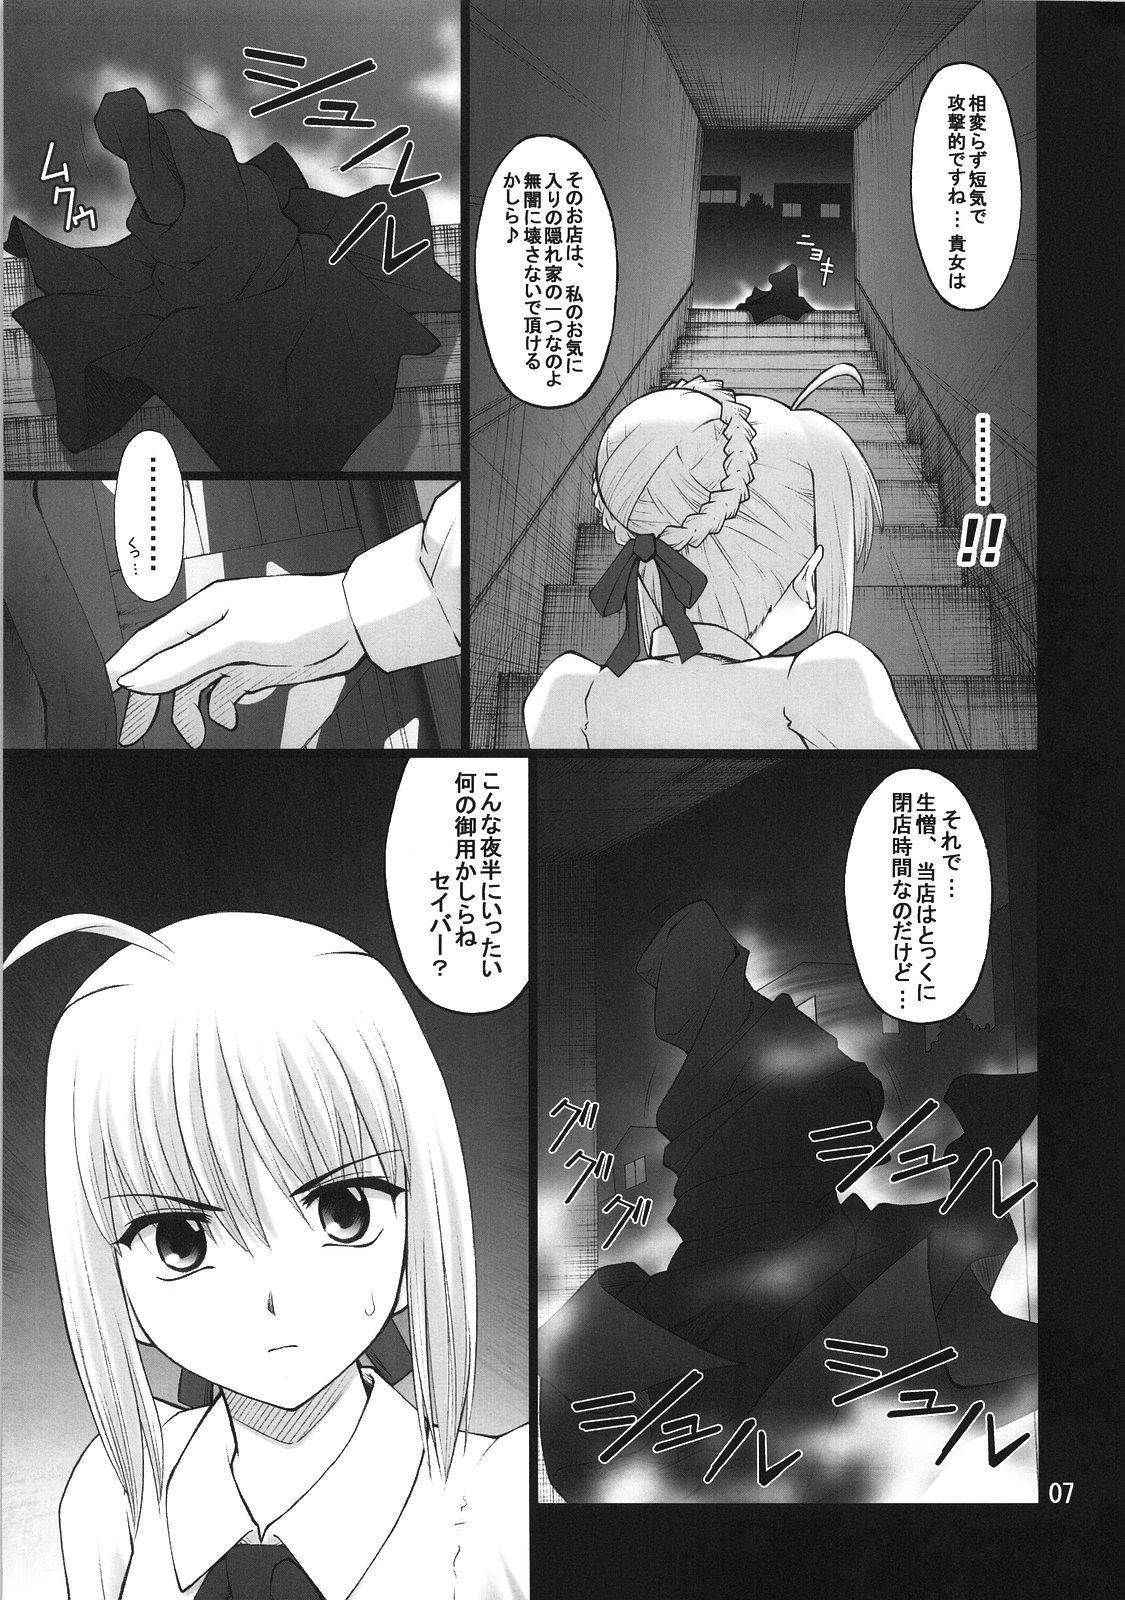 Fuck For Money Grem-Rin 3 - Fate stay night Fate hollow ataraxia Muscular - Page 6